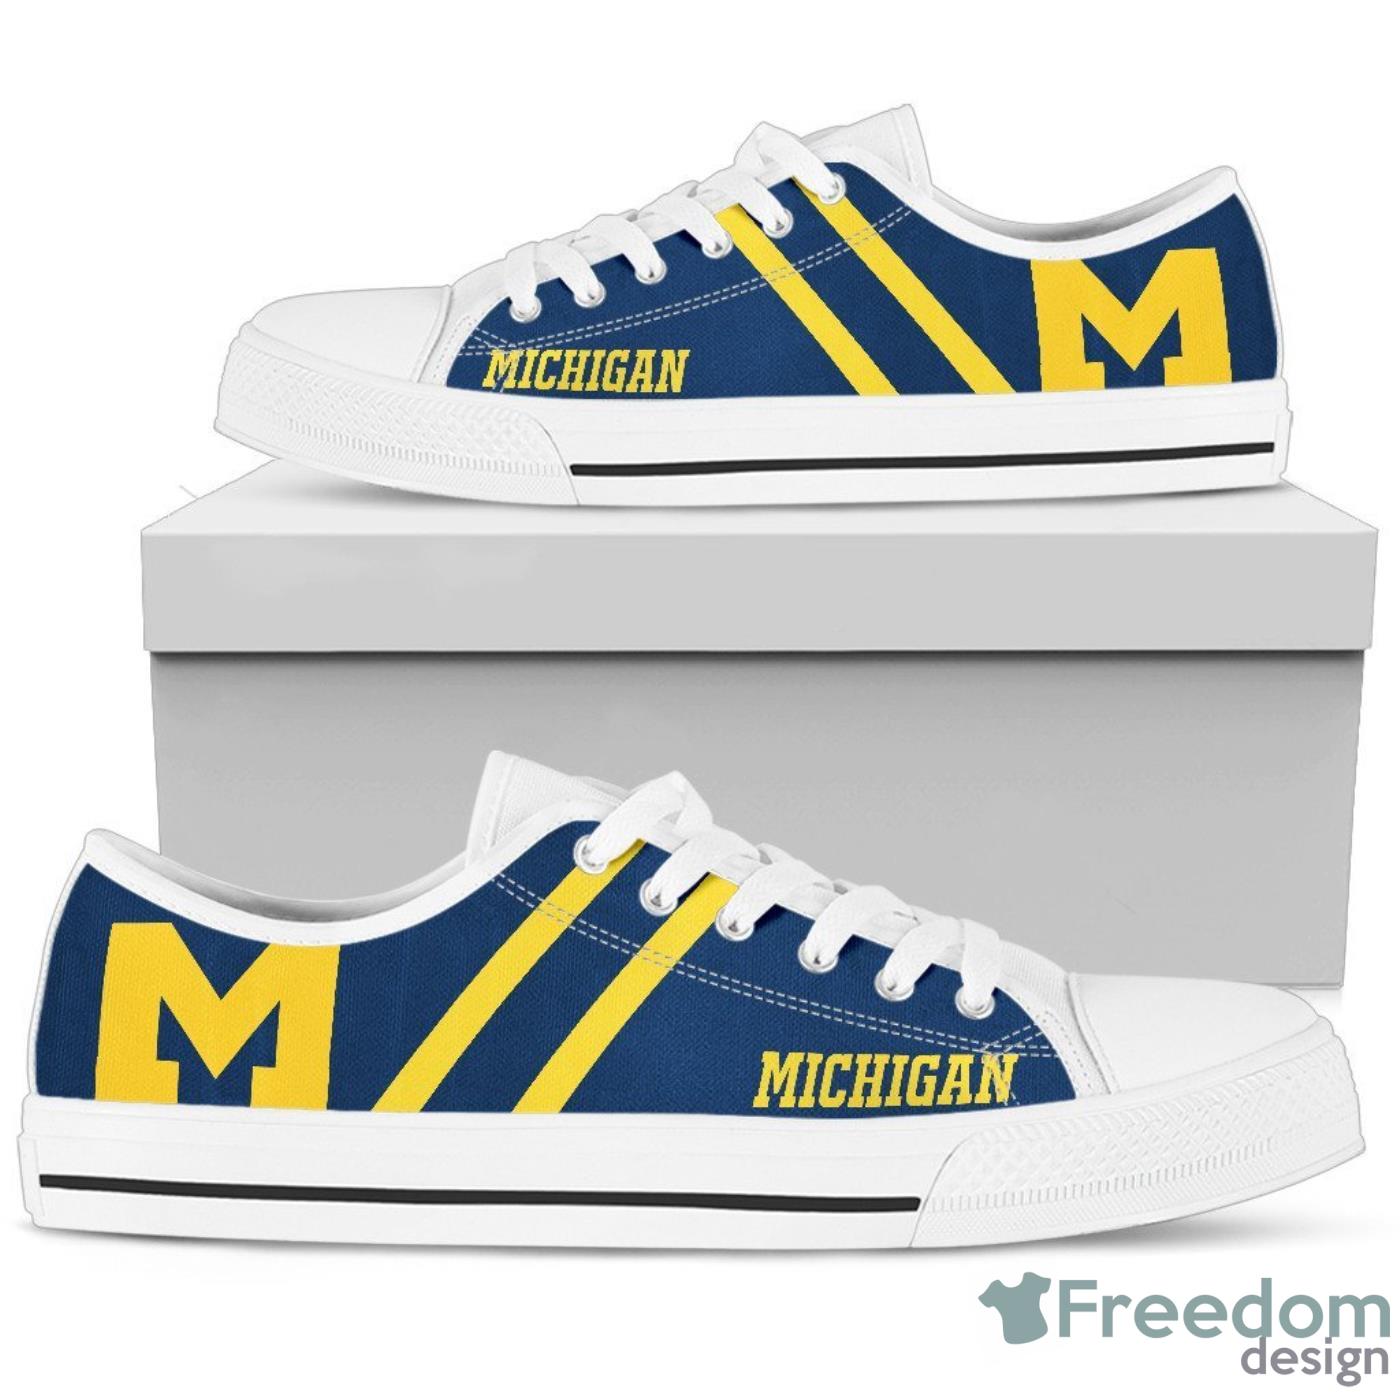 Michigan Wolverines Low Top Canvas Shoes For Men And Women Product Photo 2